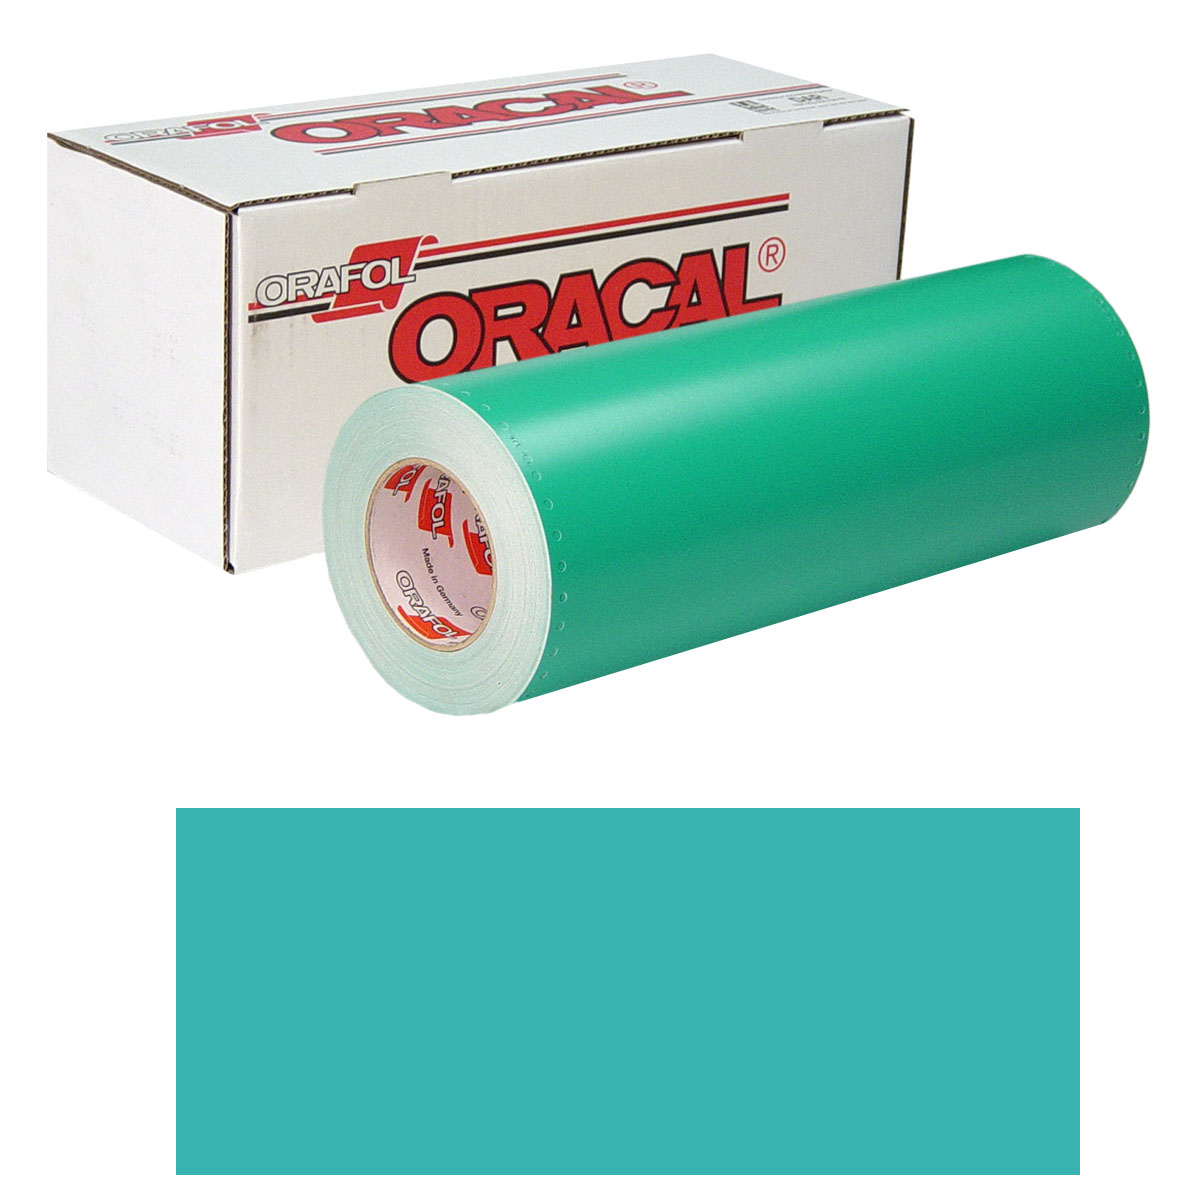 ORACAL 8500 Unp 48in X 10yd 054 Turquoise